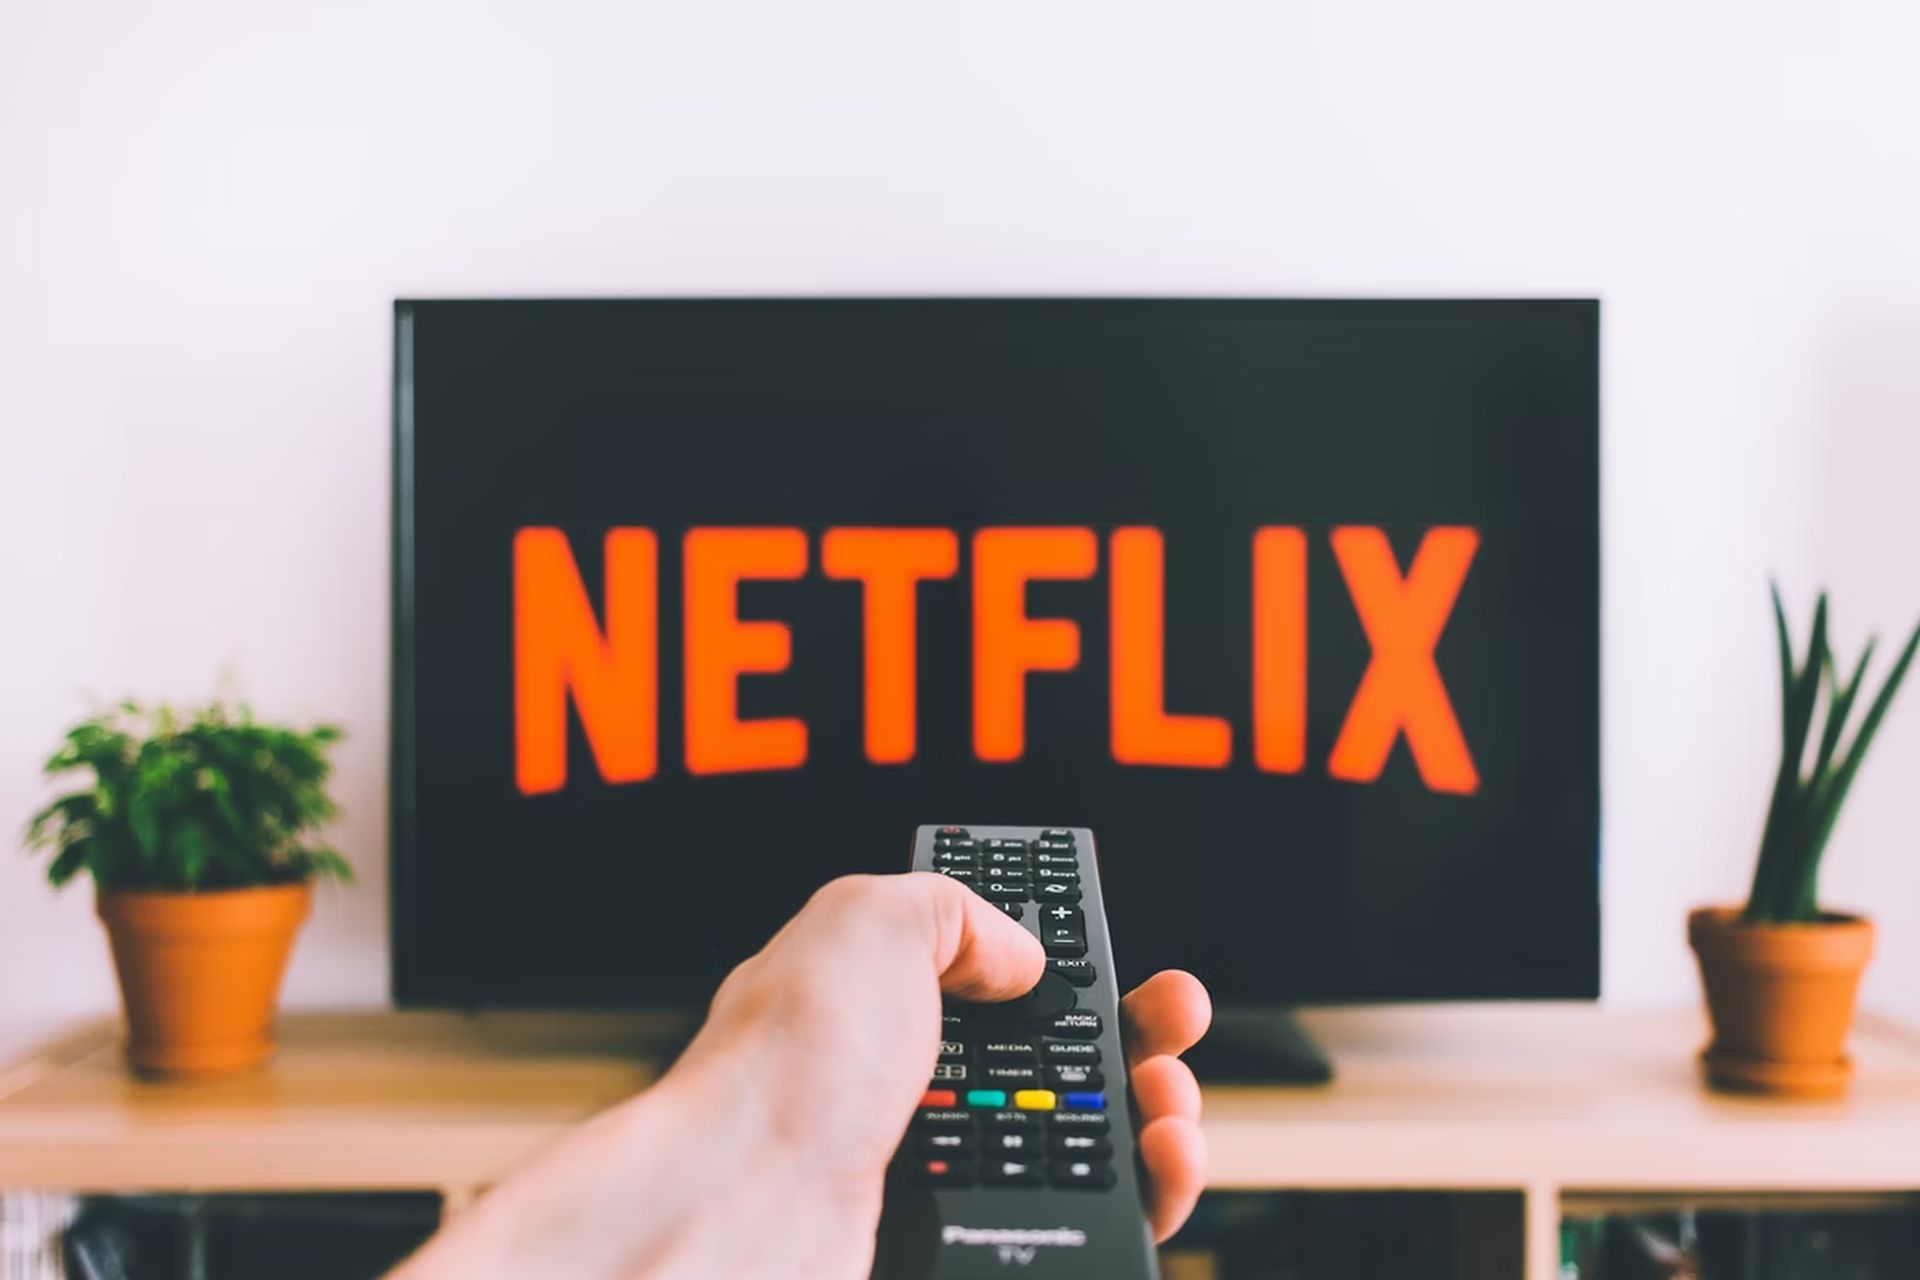 Netflix subscriber count is decreasing according to the company's Q2 earnings report.